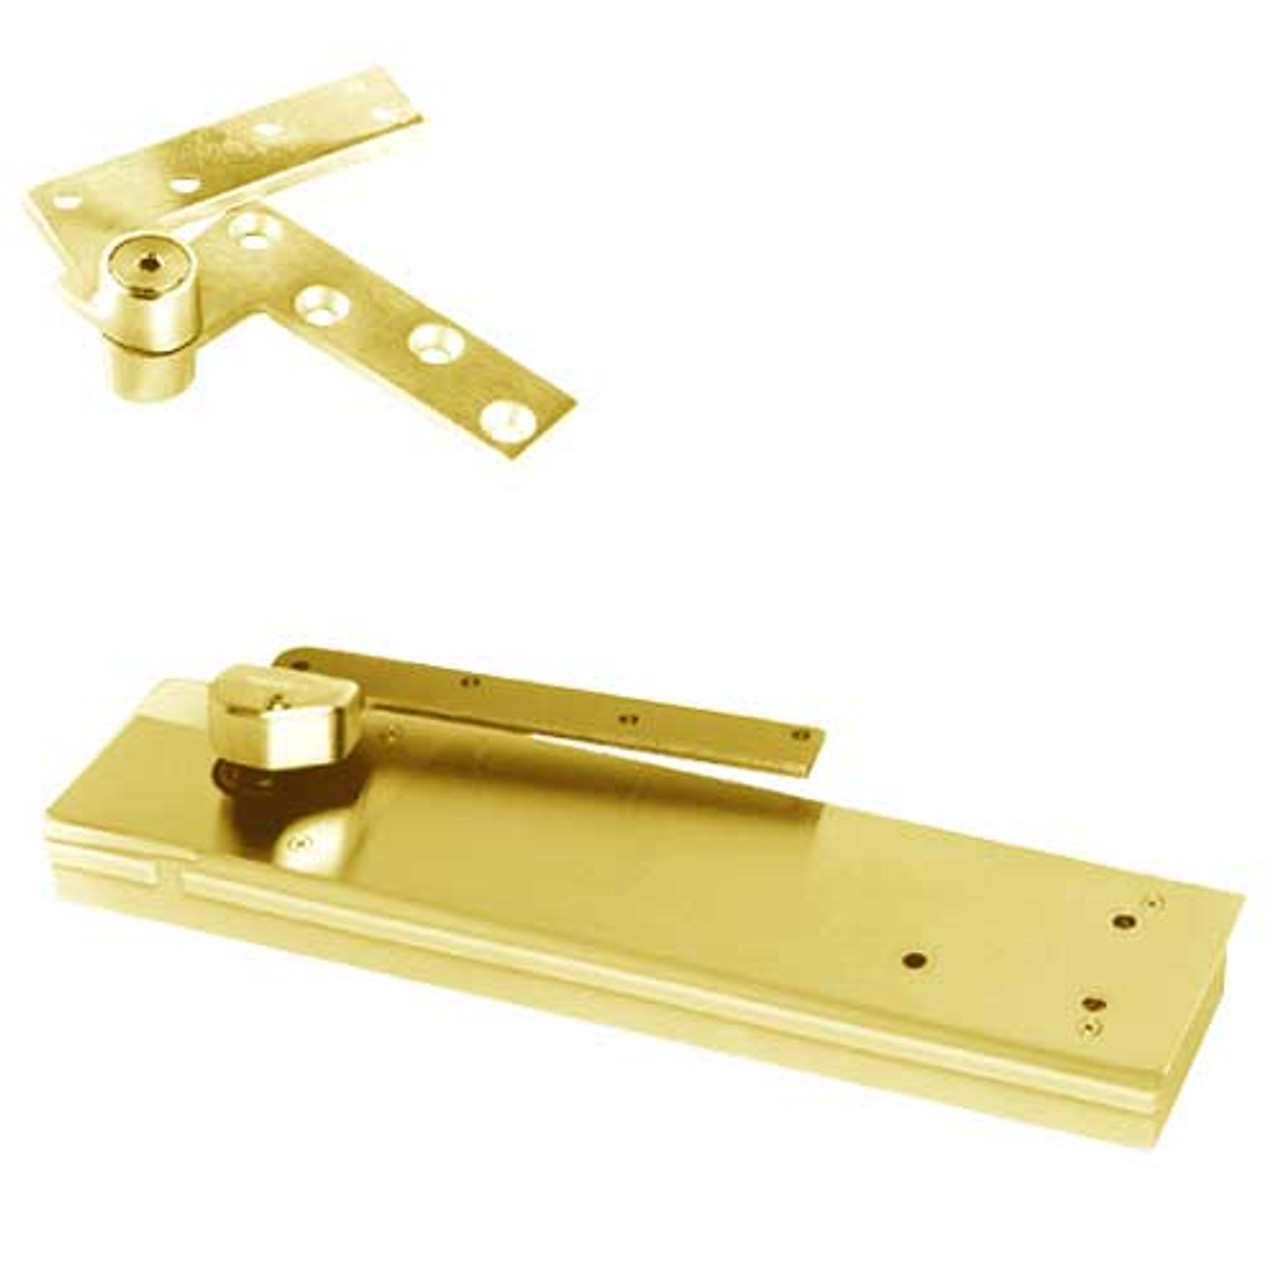 5105ABC180-1-1/2OS-LFP-LCC-LH-605 Rixson 51 Series 1-1/2" Offset Hung Shallow Depth Floor Closers in Bright Brass Finish